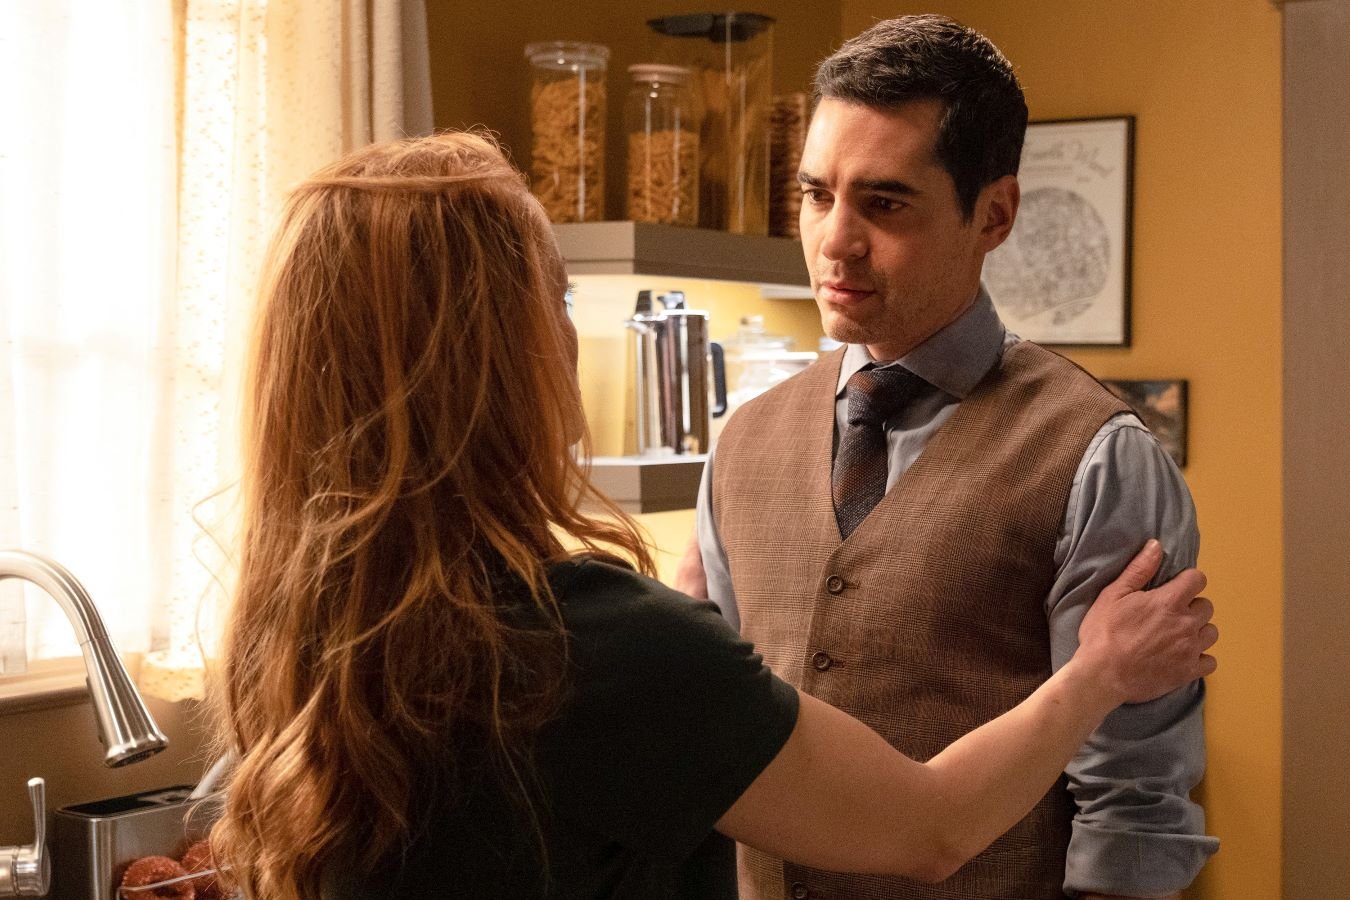 Erika Christensen and Ramón Rodríguez, in character as Angie Polaski and Will Trent in 'Will Trent,' which isn't new tonight, April 4, on ABC, share a scene. Angie wears a black shirt. Will wears a tan vest over a light gray button-up shirt and dark gray tie.